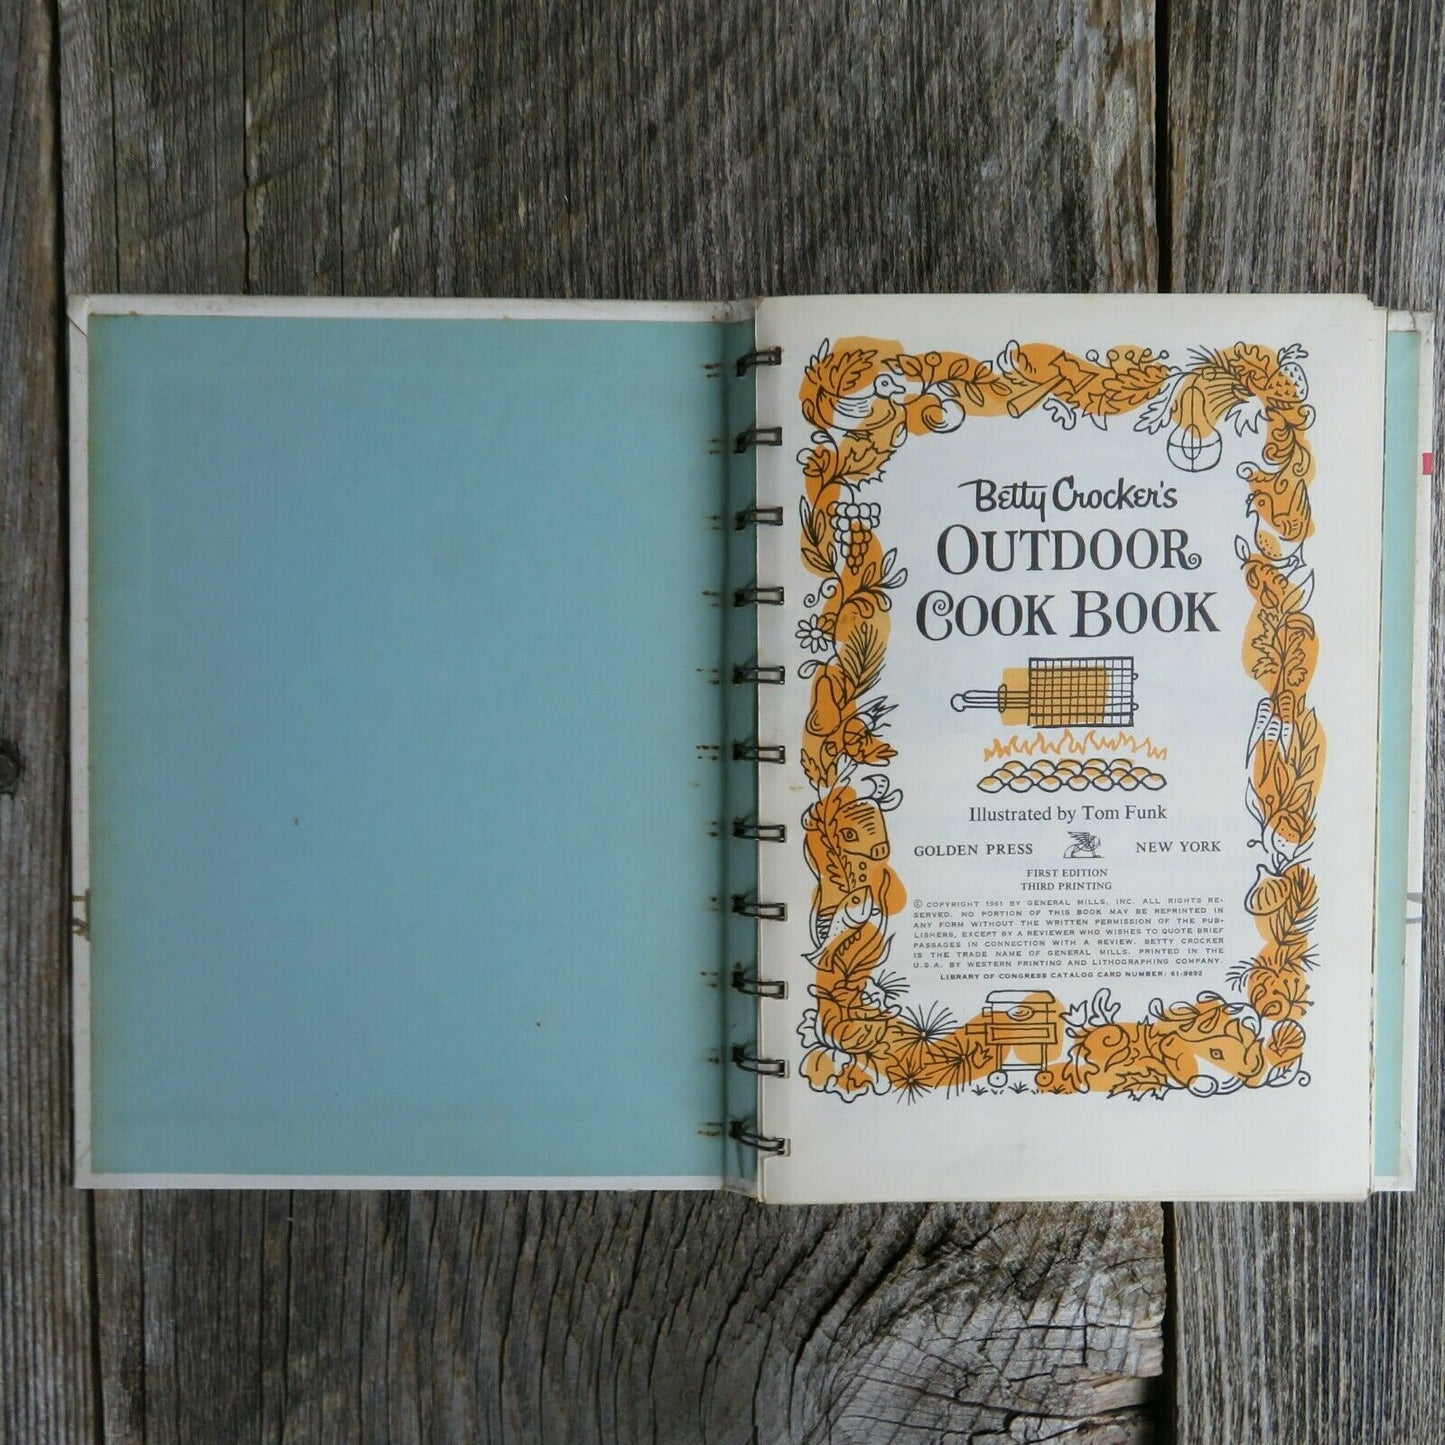 Vintage Cookbook Betty Crocker Outdoor First Edition Third Printing 1961 BBQ - At Grandma's Table